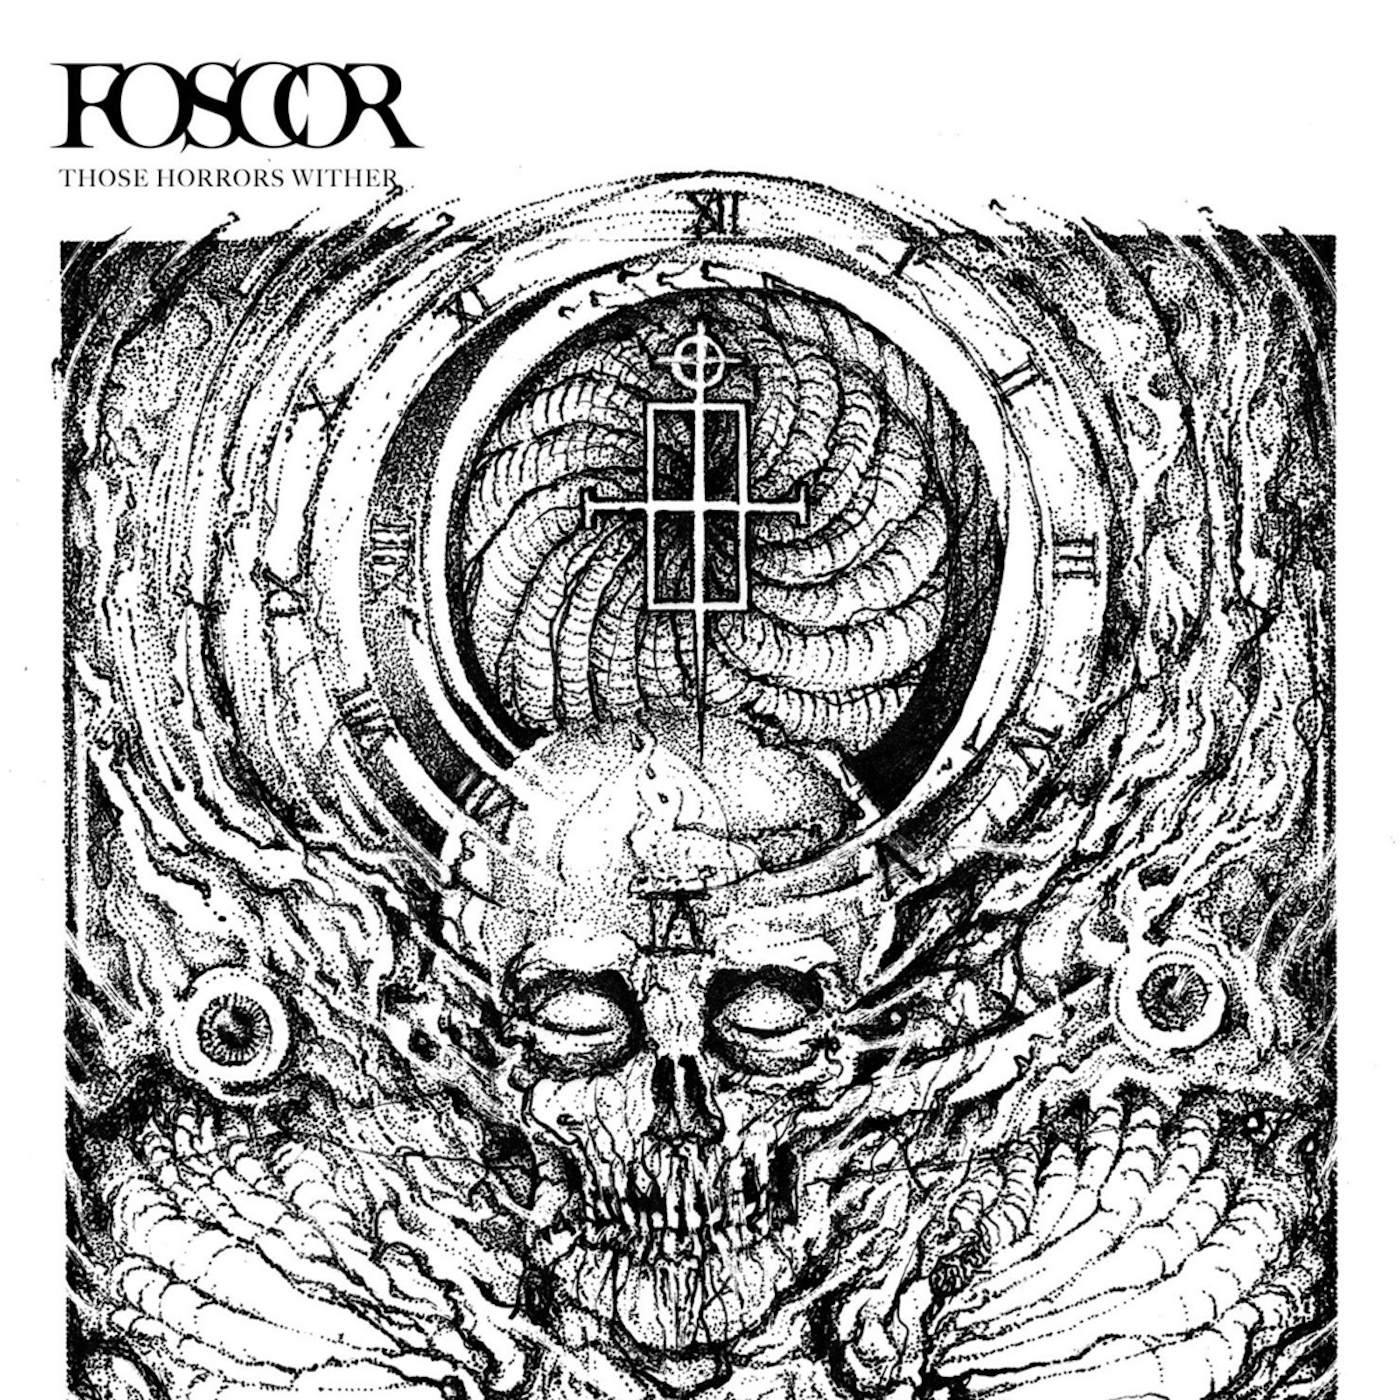 Foscor Those Horrors Wither Vinyl Record